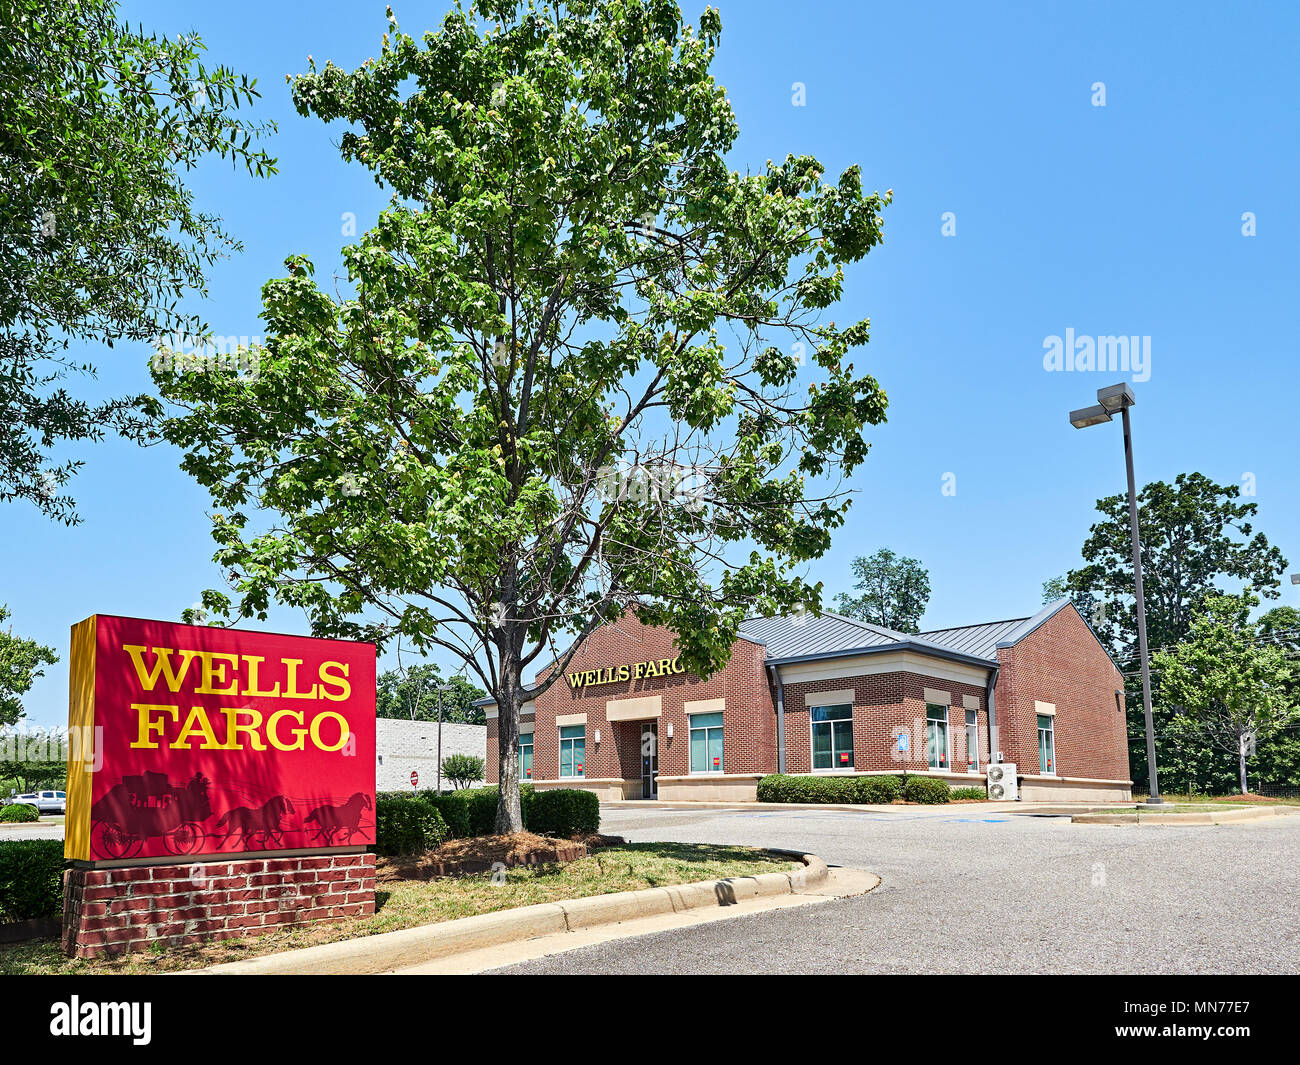 Wells Fargo Bank branch sign, with corporate logo, exterior and entrance in Montgomery Alabama, USA. Stock Photo